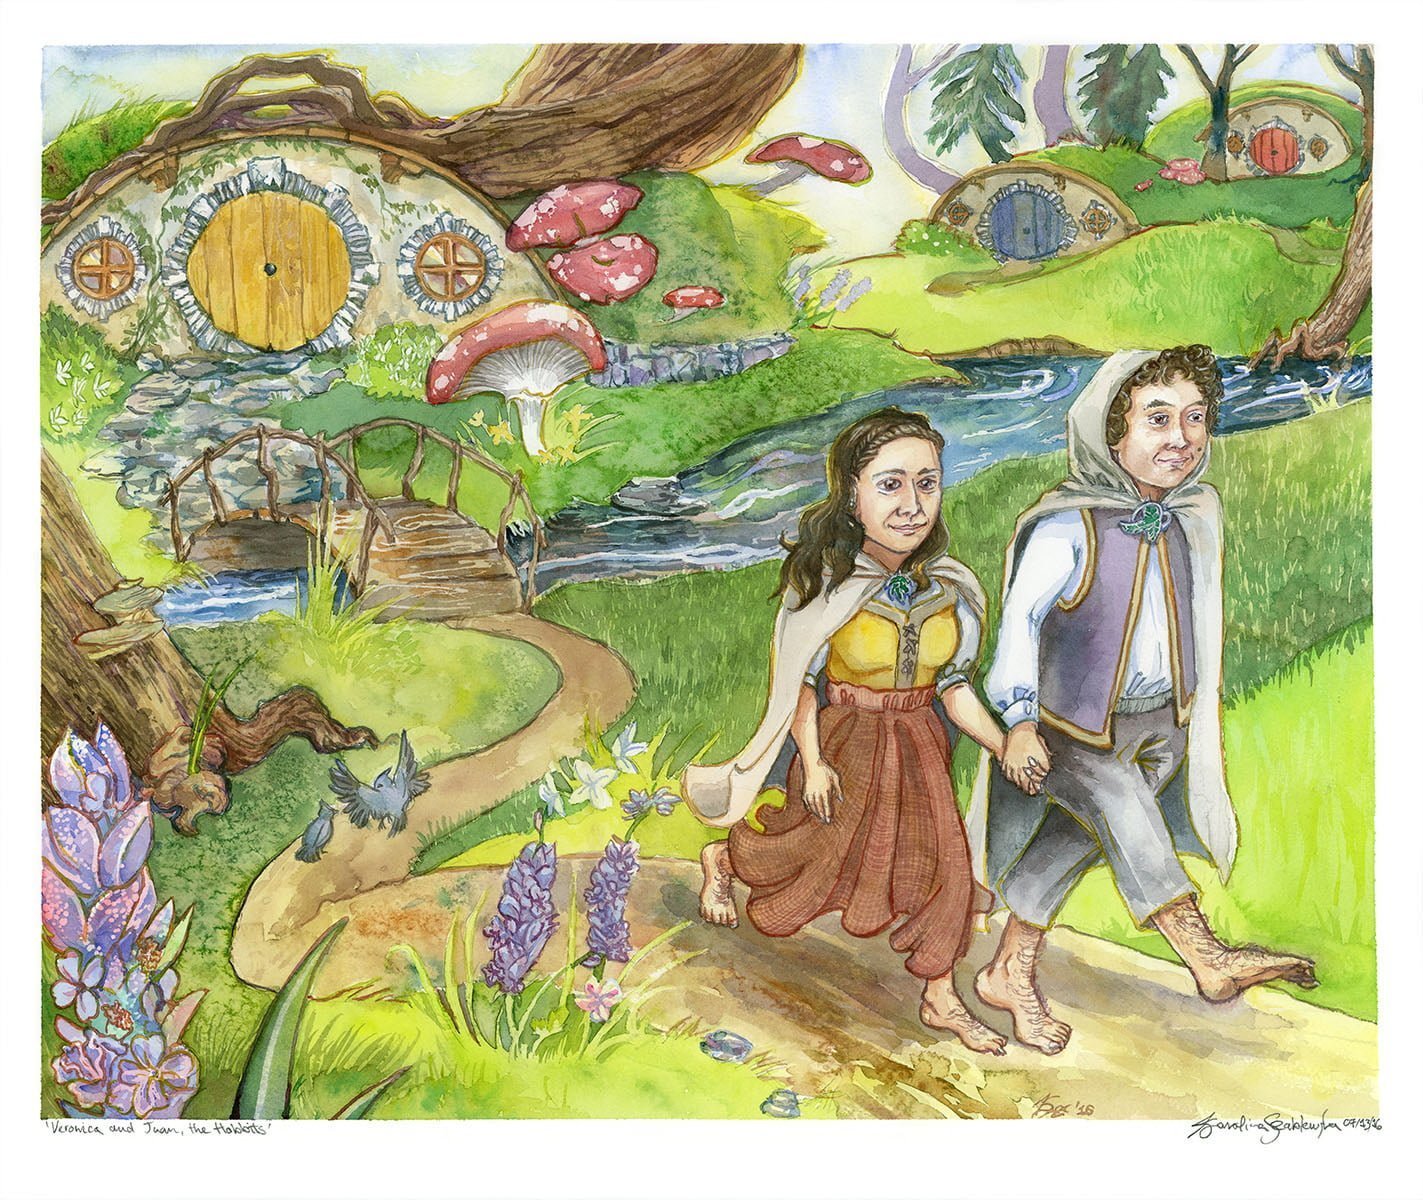 hobbits walking through the wood from hobbit house watercolor painting